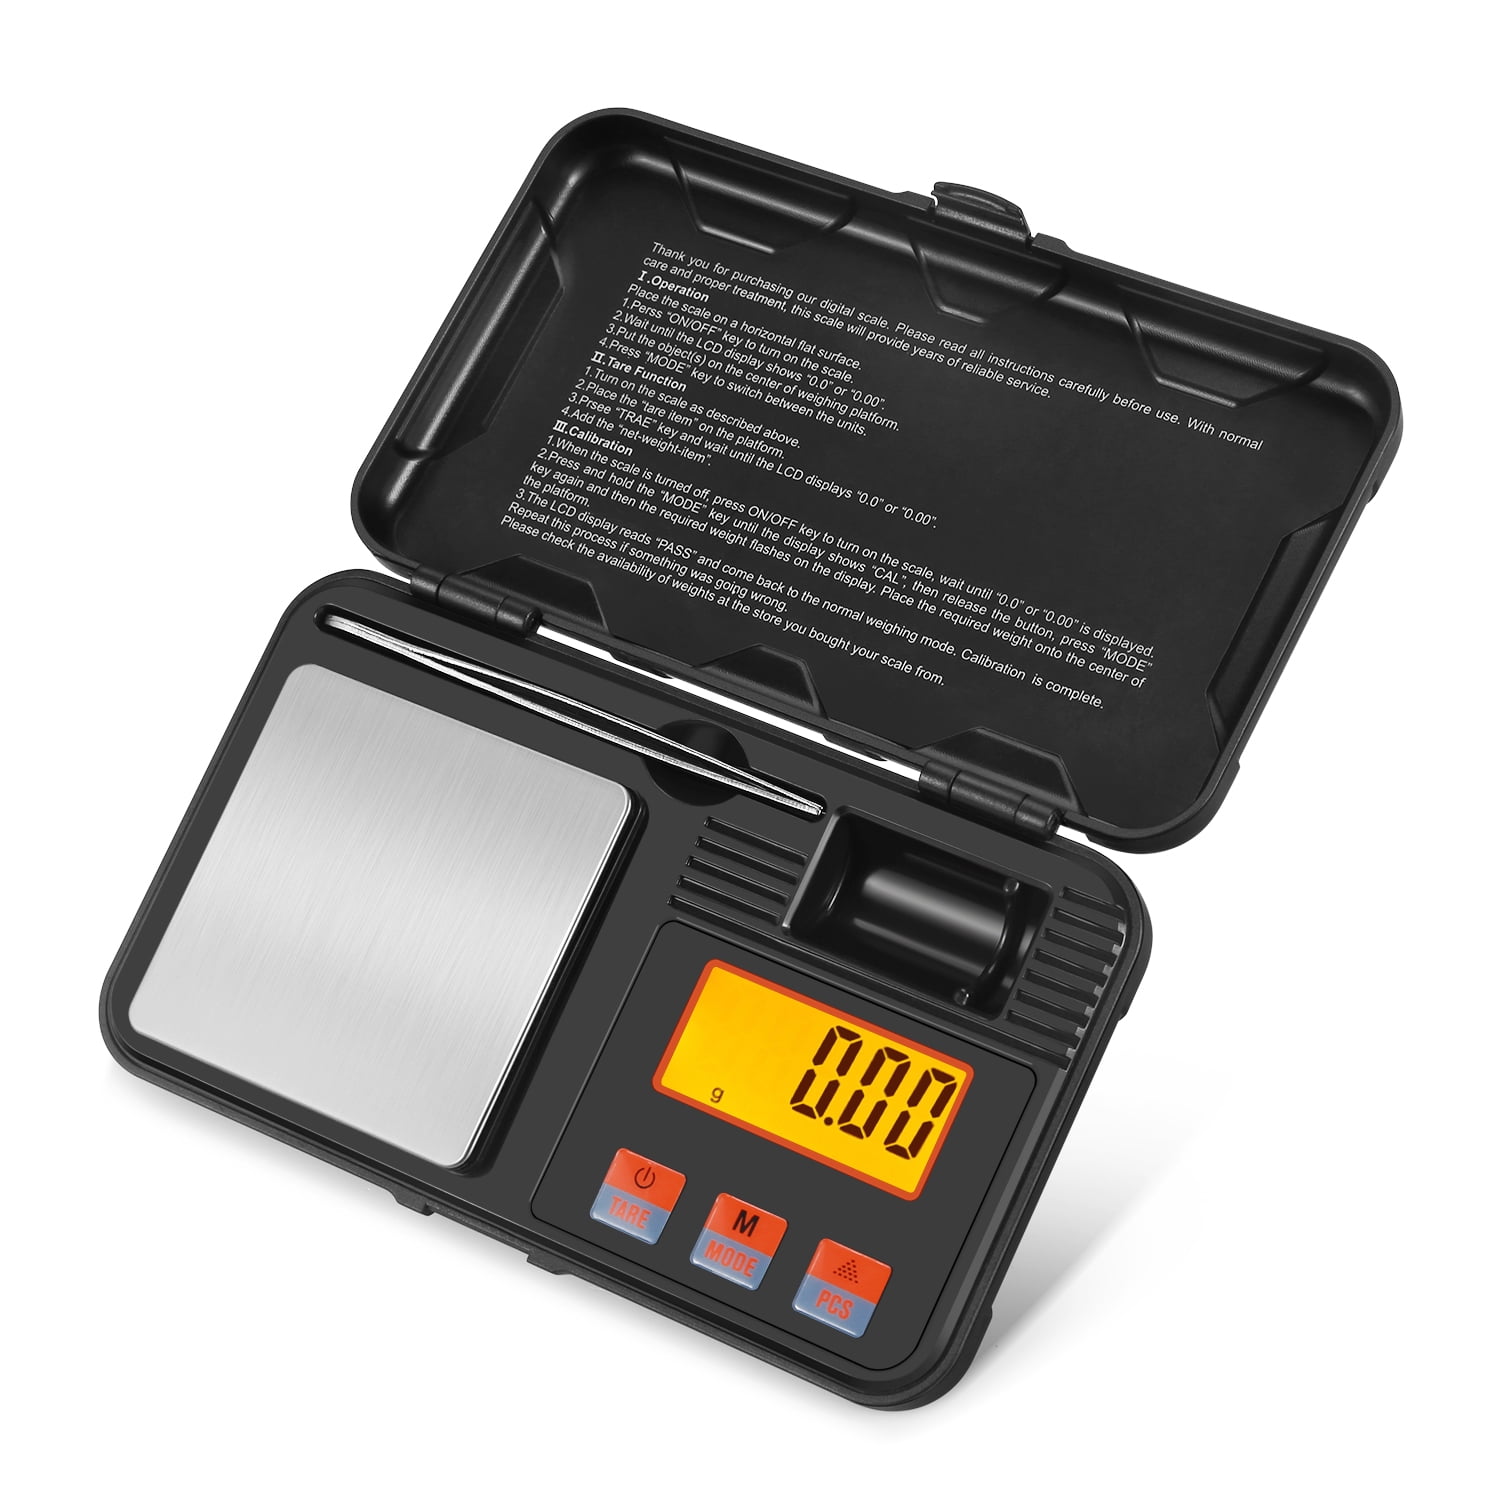 Weighing Scale - Digital Pocket Scale 0.1 Grams To 200 Grams